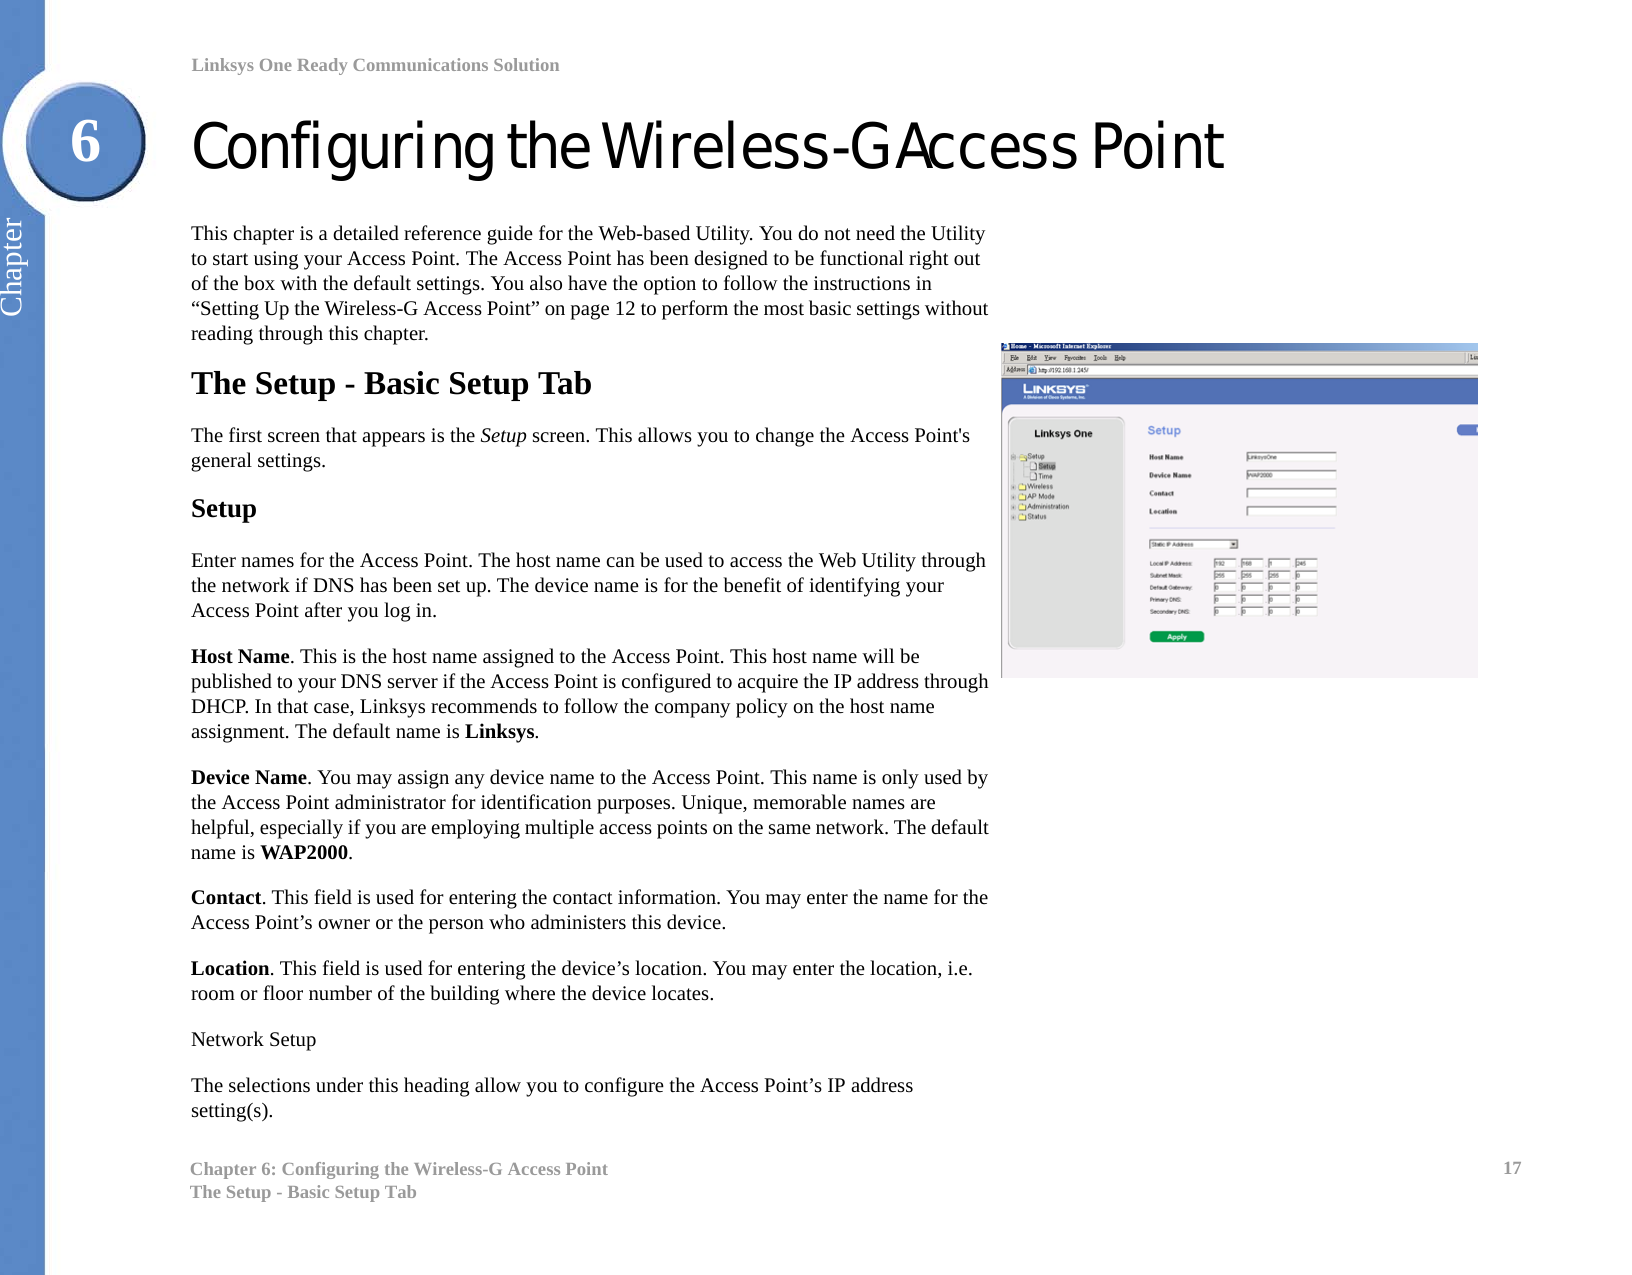 17Chapter 6: Configuring the Wireless-G Access PointThe Setup - Basic Setup TabLinksys One Ready Communications SolutionChapter6Configuring the Wireless-G Access PointThis chapter is a detailed reference guide for the Web-based Utility. You do not need the Utility to start using your Access Point. The Access Point has been designed to be functional right out of the box with the default settings. You also have the option to follow the instructions in “Setting Up the Wireless-G Access Point” on page 12 to perform the most basic settings without reading through this chapter. The Setup - Basic Setup TabThe first screen that appears is the Setup screen. This allows you to change the Access Point&apos;s general settings.SetupEnter names for the Access Point. The host name can be used to access the Web Utility through the network if DNS has been set up. The device name is for the benefit of identifying your Access Point after you log in.Host Name. This is the host name assigned to the Access Point. This host name will be published to your DNS server if the Access Point is configured to acquire the IP address through DHCP. In that case, Linksys recommends to follow the company policy on the host name assignment. The default name is Linksys.Device Name. You may assign any device name to the Access Point. This name is only used by the Access Point administrator for identification purposes. Unique, memorable names are helpful, especially if you are employing multiple access points on the same network. The default name is WAP2000.Contact. This field is used for entering the contact information. You may enter the name for the Access Point’s owner or the person who administers this device.Location. This field is used for entering the device’s location. You may enter the location, i.e. room or floor number of the building where the device locates.Network SetupThe selections under this heading allow you to configure the Access Point’s IP address setting(s).